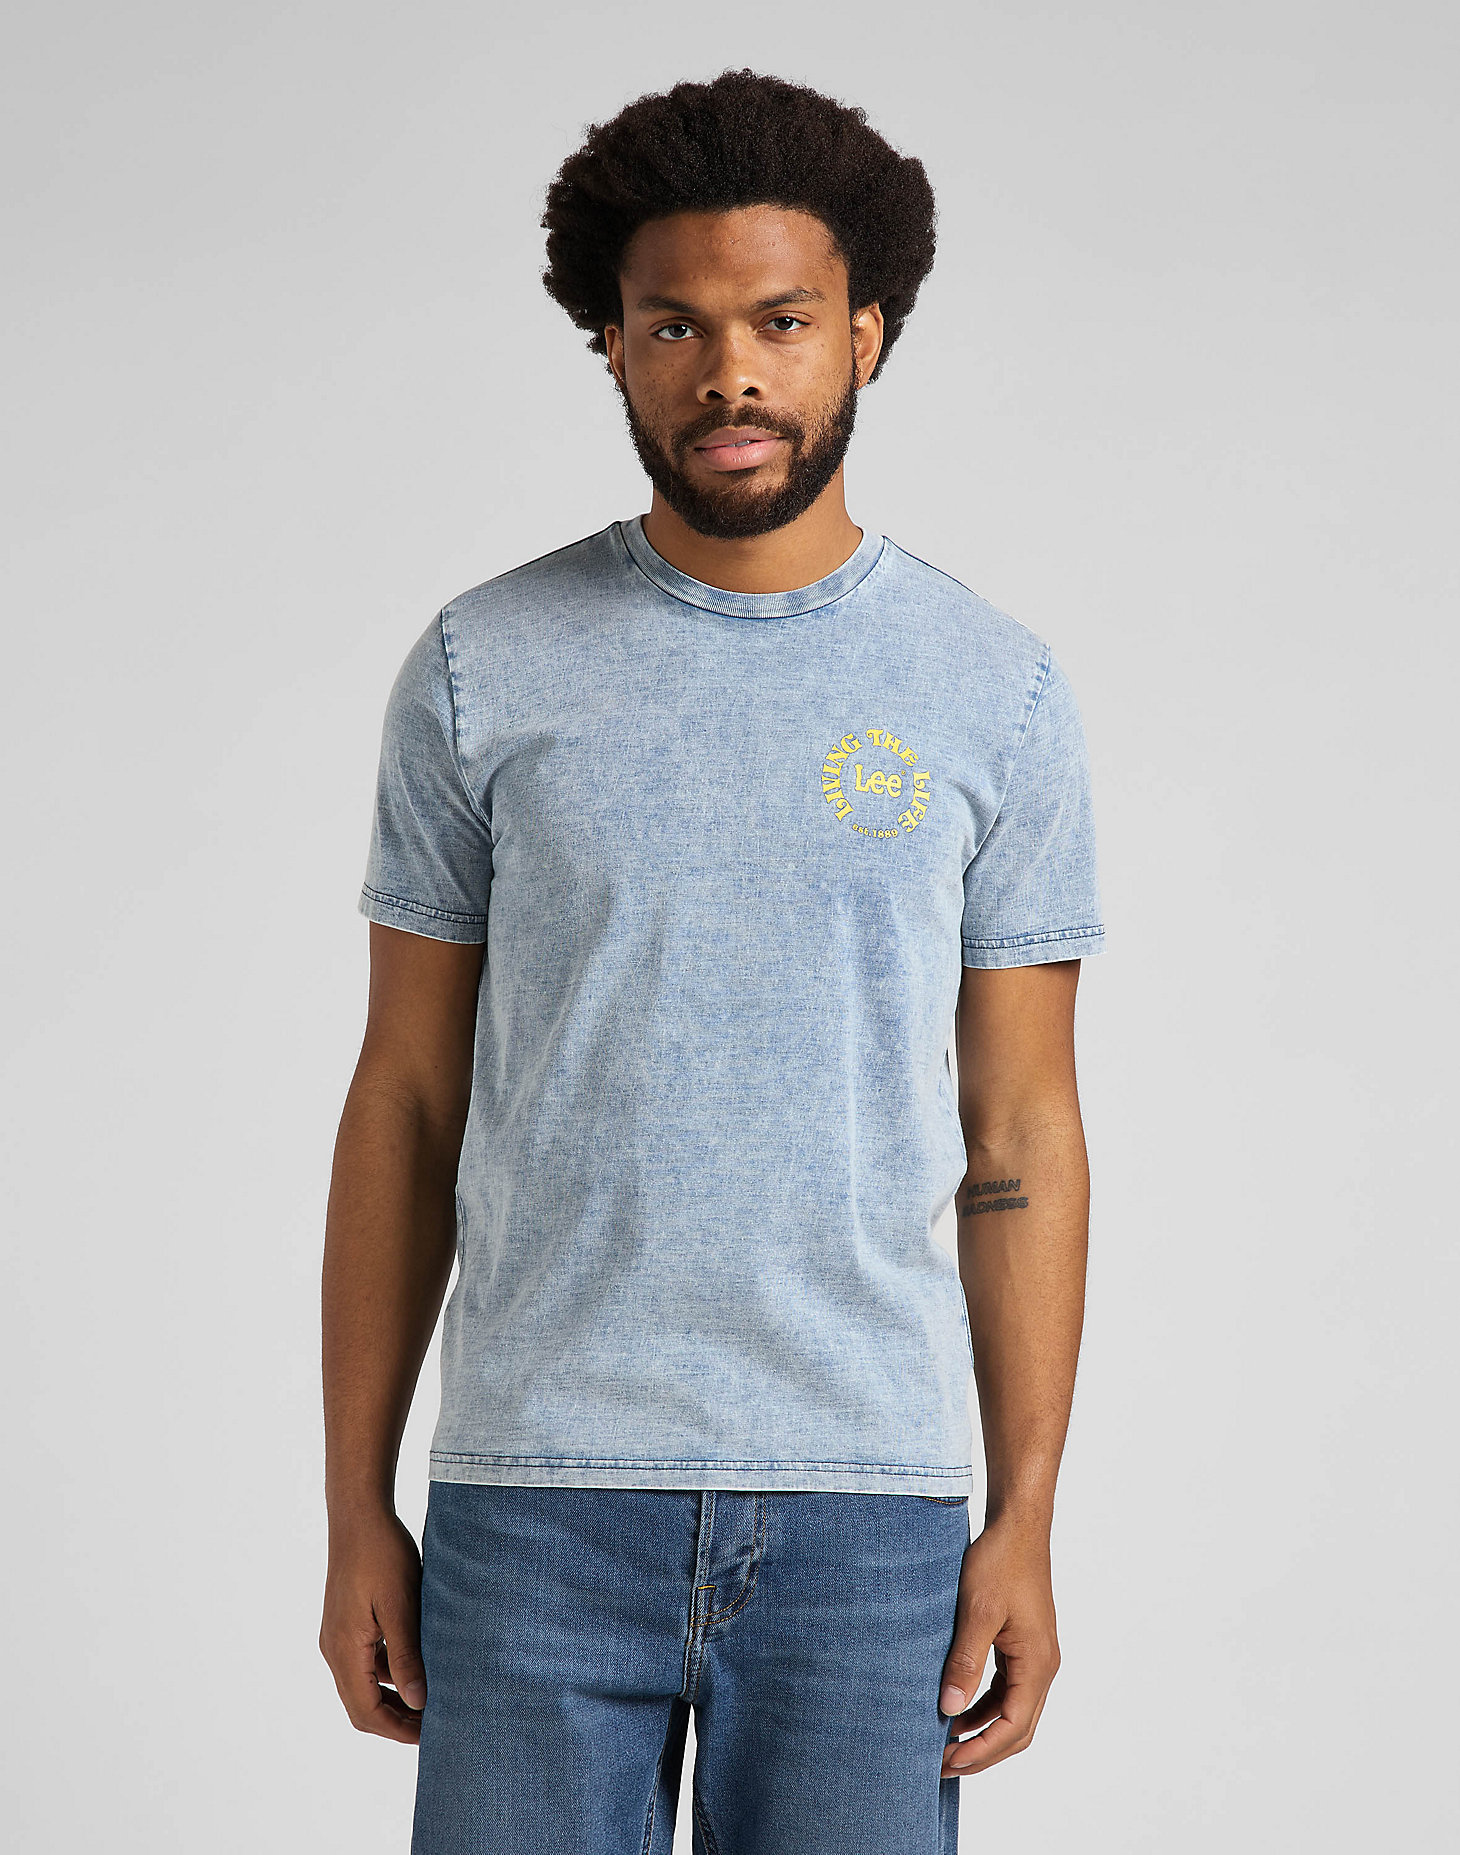 Living The Life Tee in Indigo main view